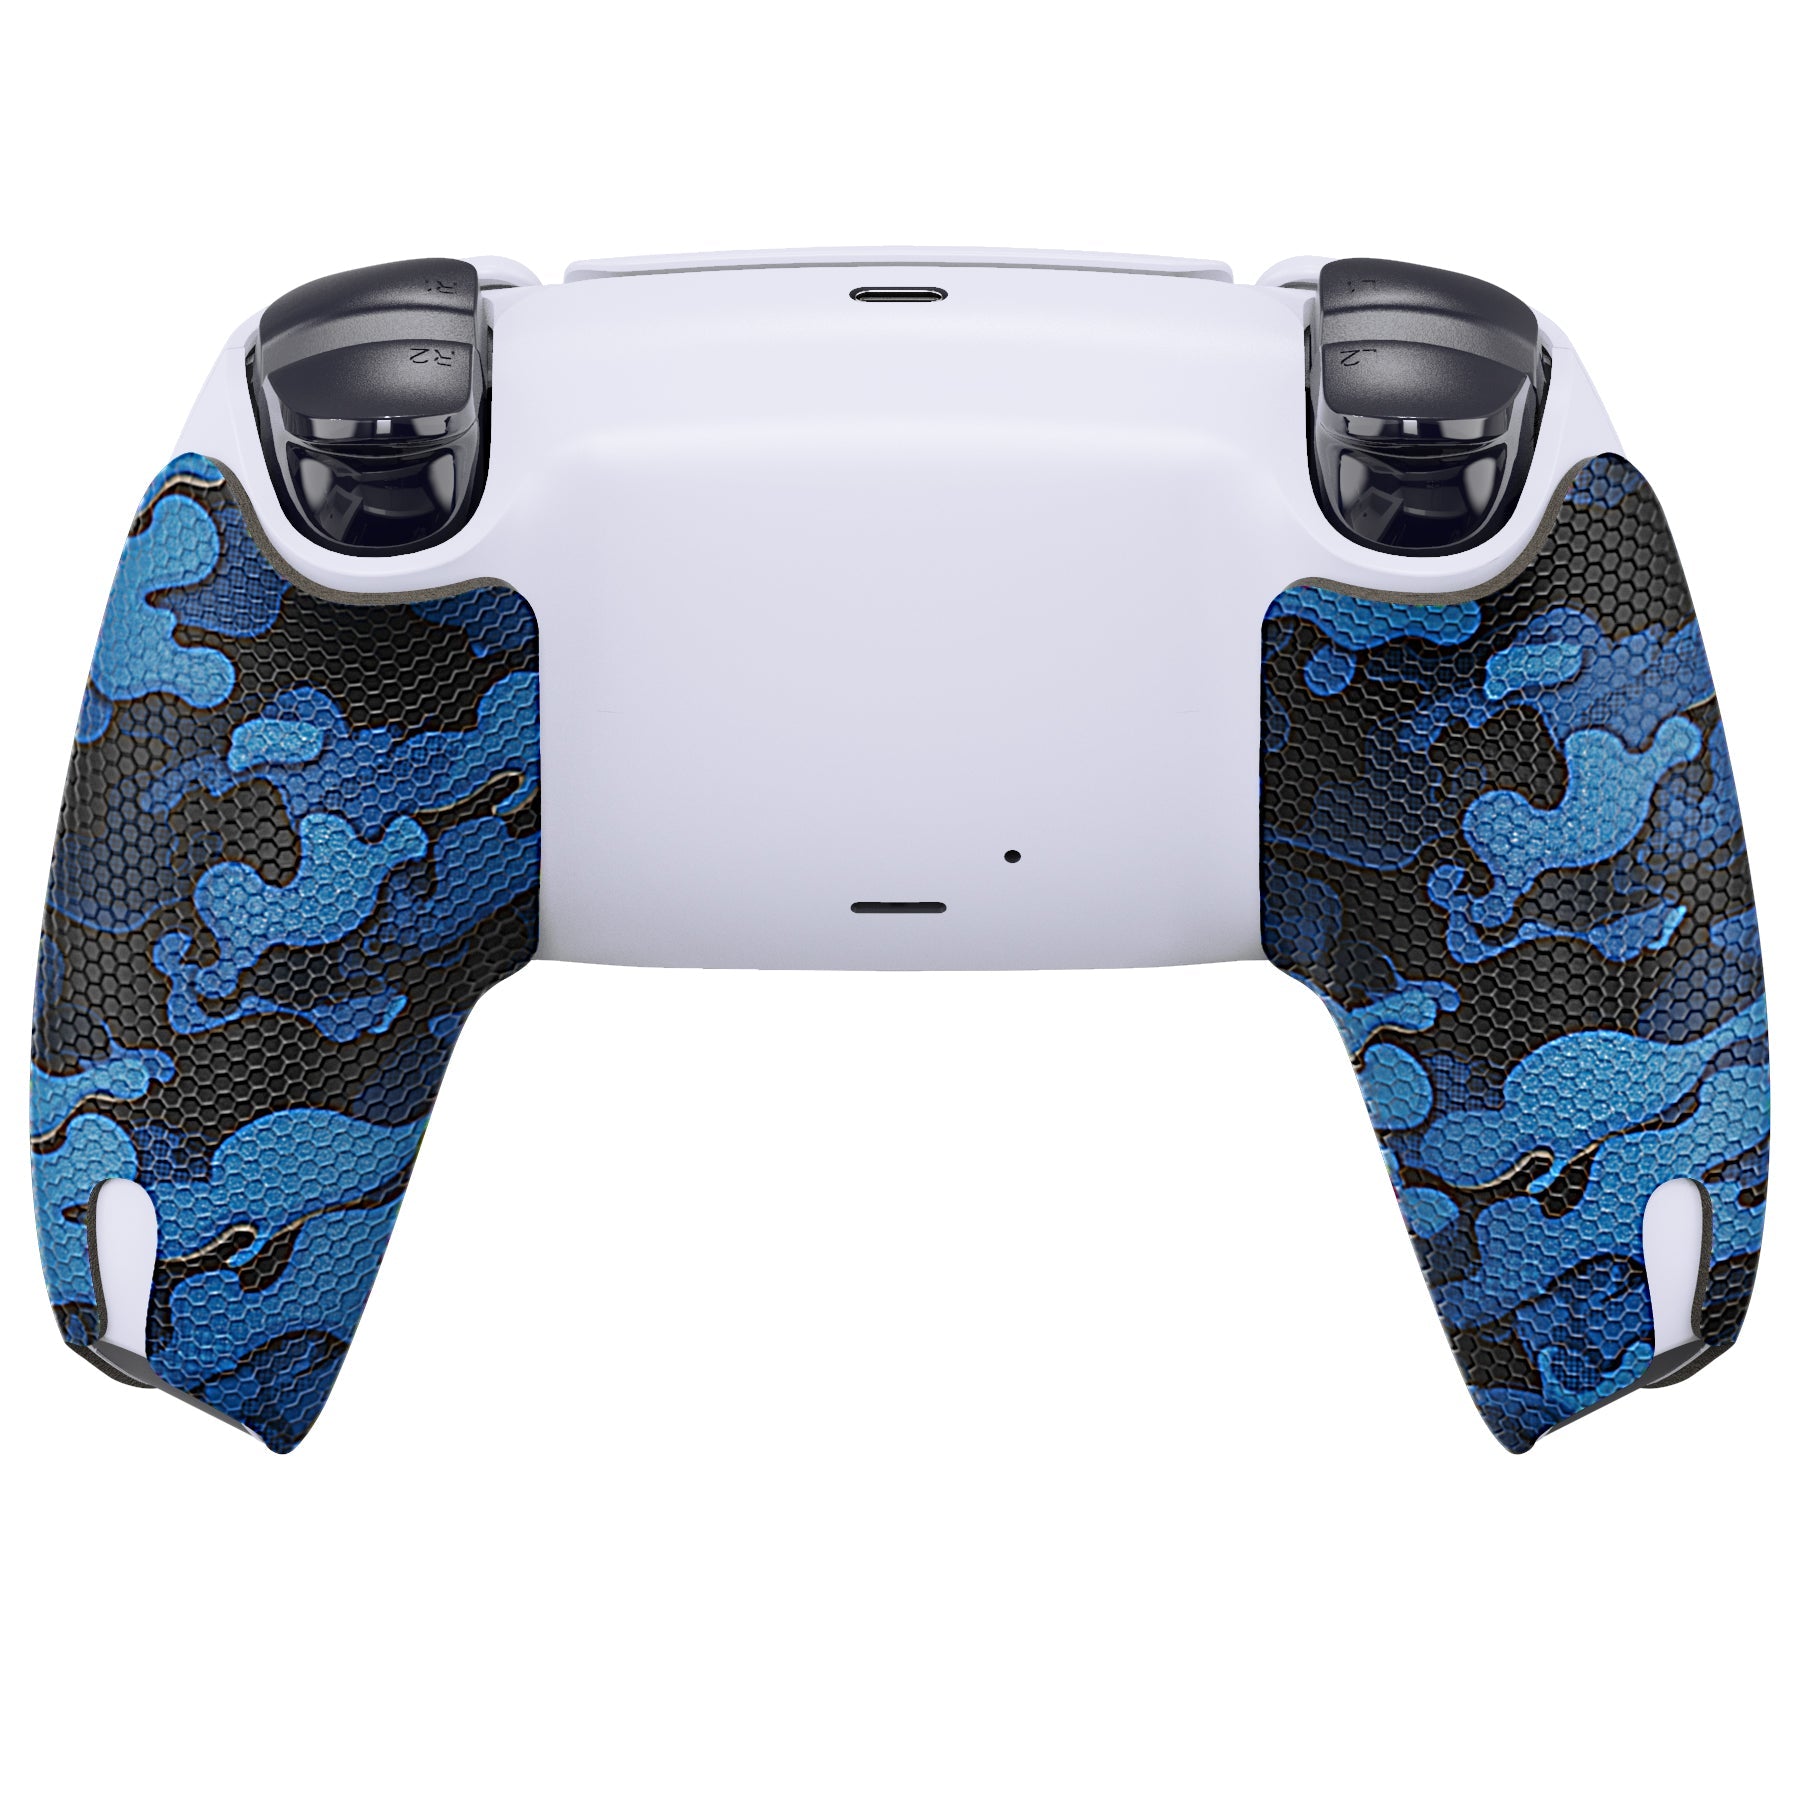 PlayVital Anti-Skid Sweat-Absorbent Controller Grip for PS5 Controller, Professional Textured Soft Rubber Pads Handle Grips for PS5 Controller - Black Blue Camouflage - PFPJ063 PlayVital